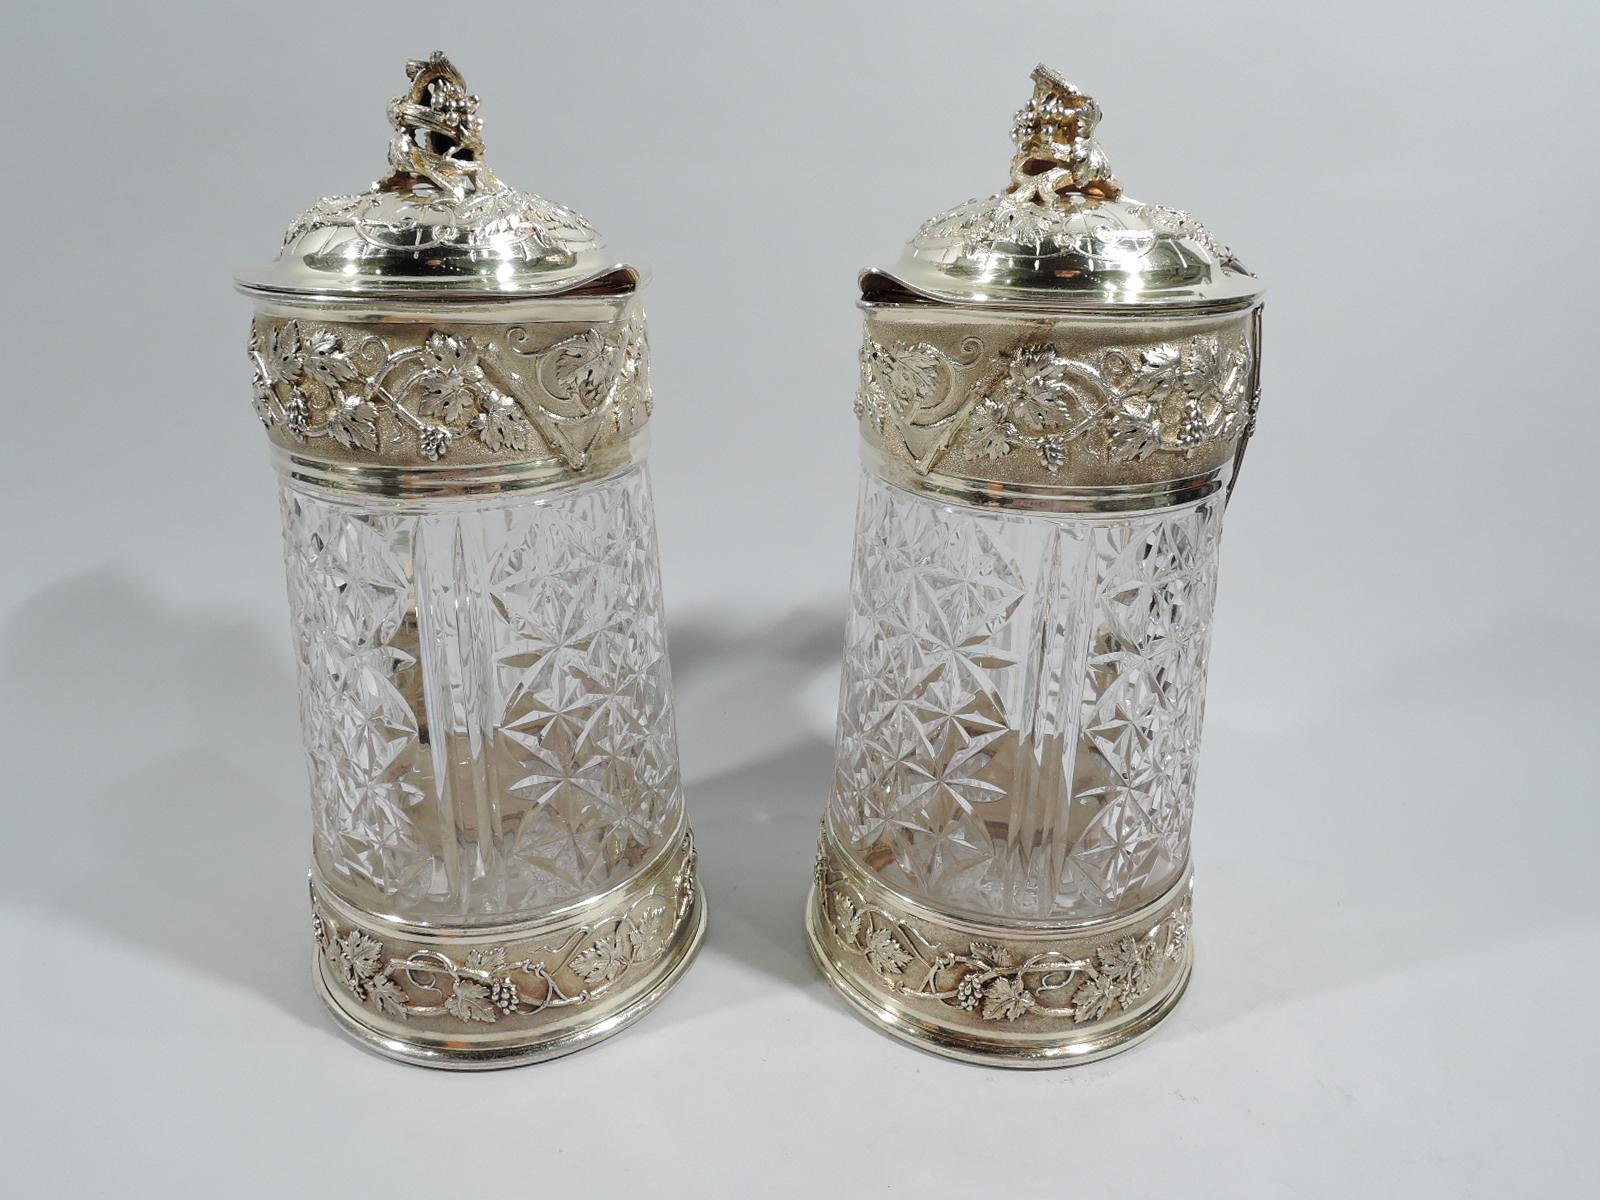 Pair of Belle Epoque cut-glass and gilt 950 silver decanters. Made by Odiot in France, ca 1880. Gently upward tapering body with alternating double flutes and paterae set in silver-gilt bands with chased fruiting grapevine. Scrolled handle and